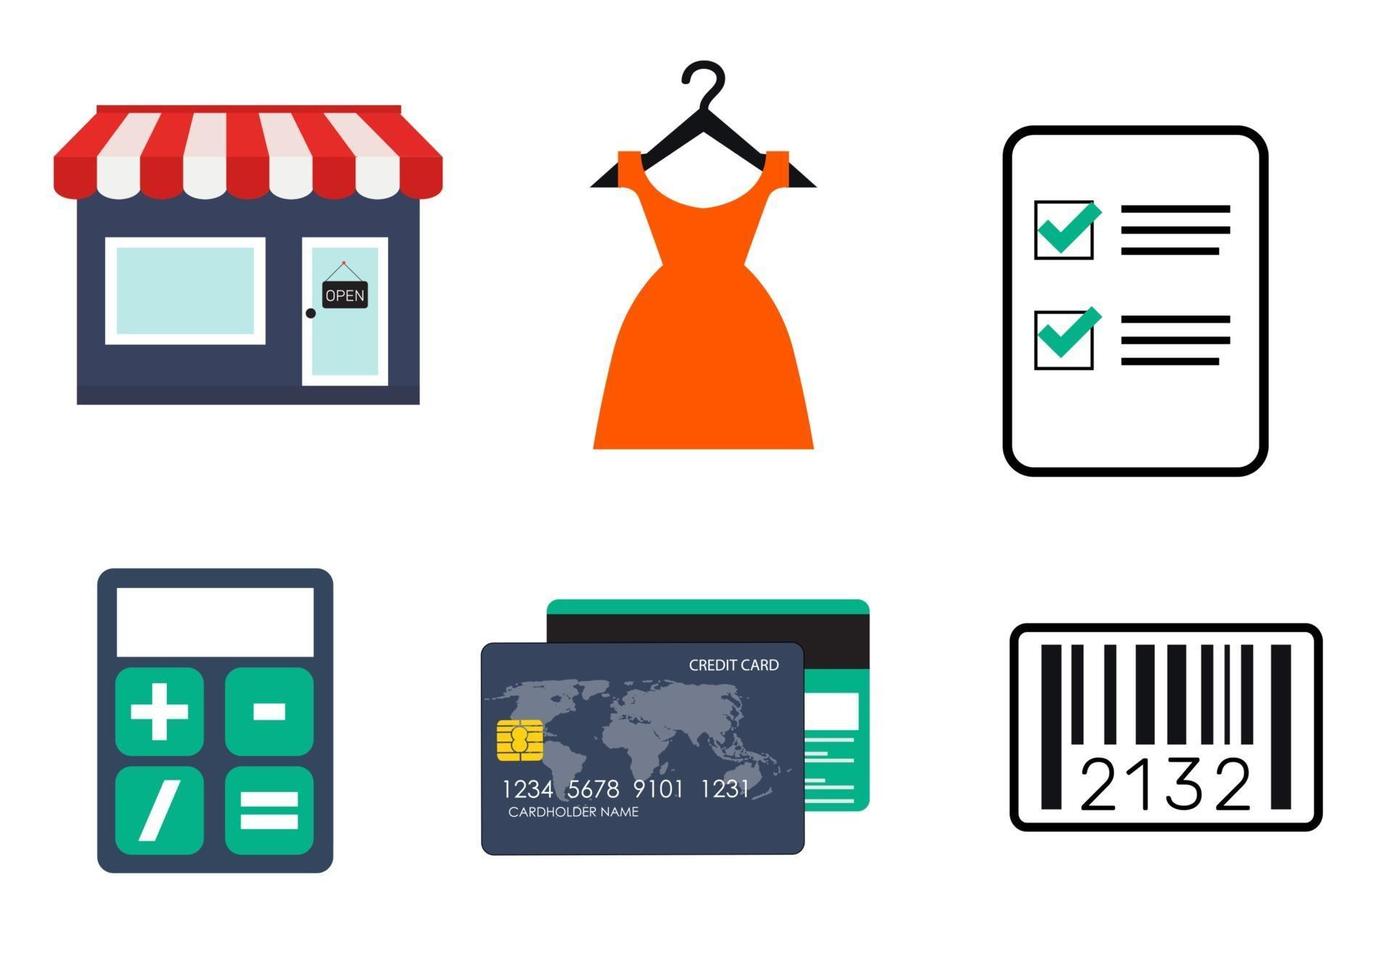 Shopping Flat Simple Icon Collection with Retail Store, Dress, Credit Card, Calculator, Check List and Bar Code. Vector Illustration